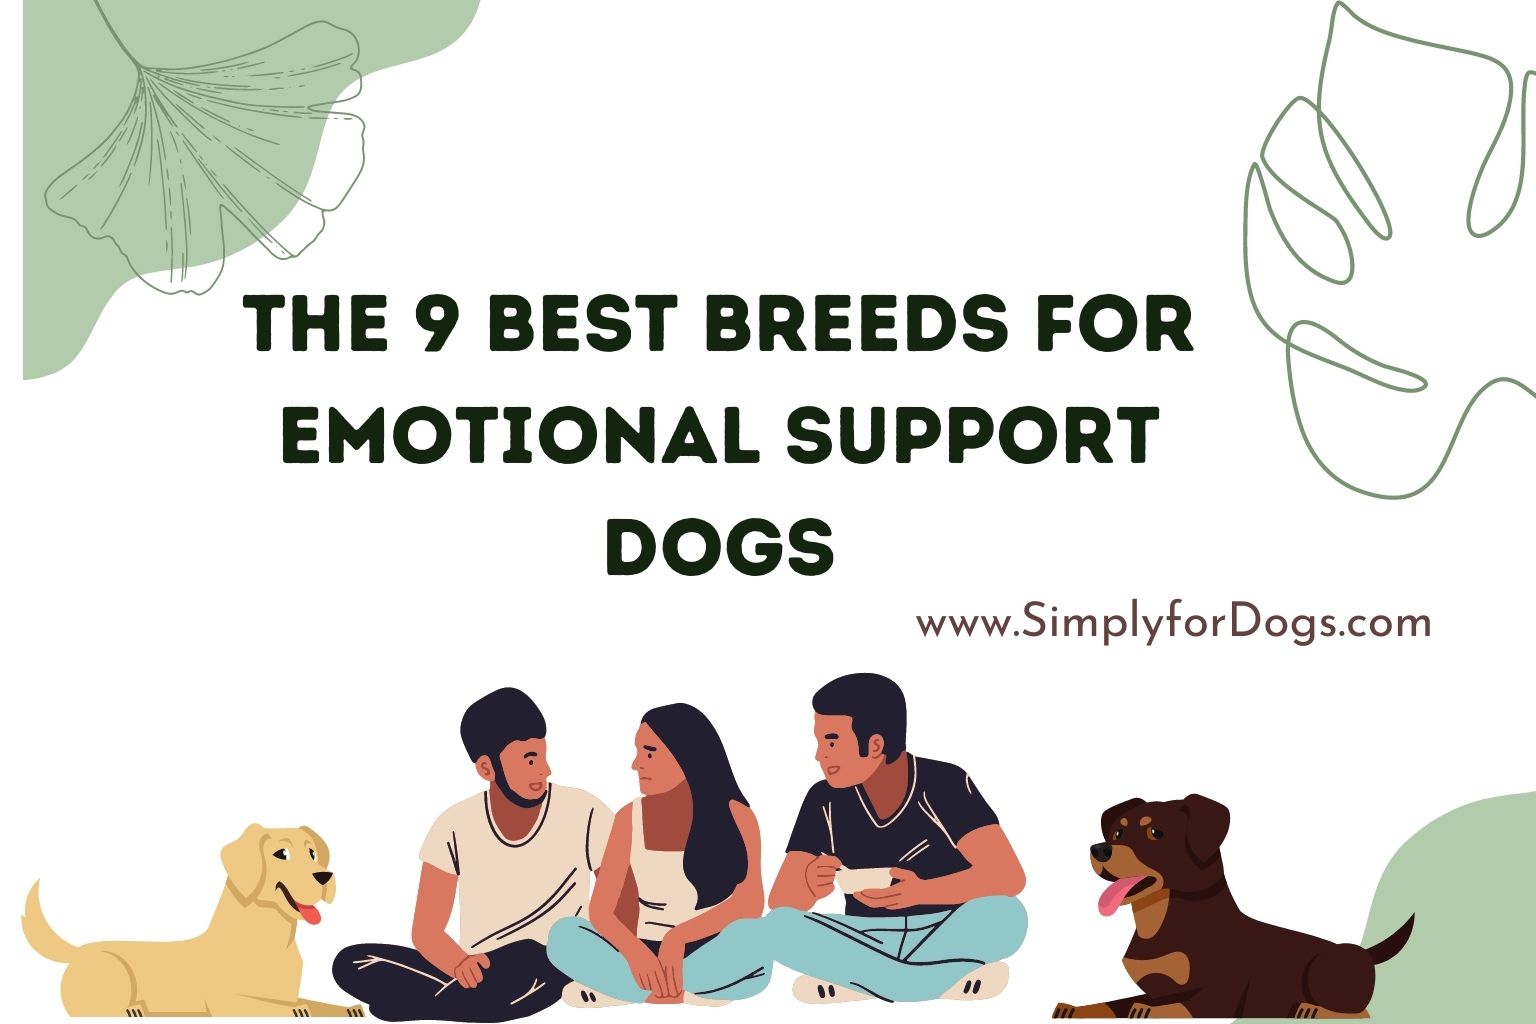 The 9 Best Breeds for Emotional Support Dogs